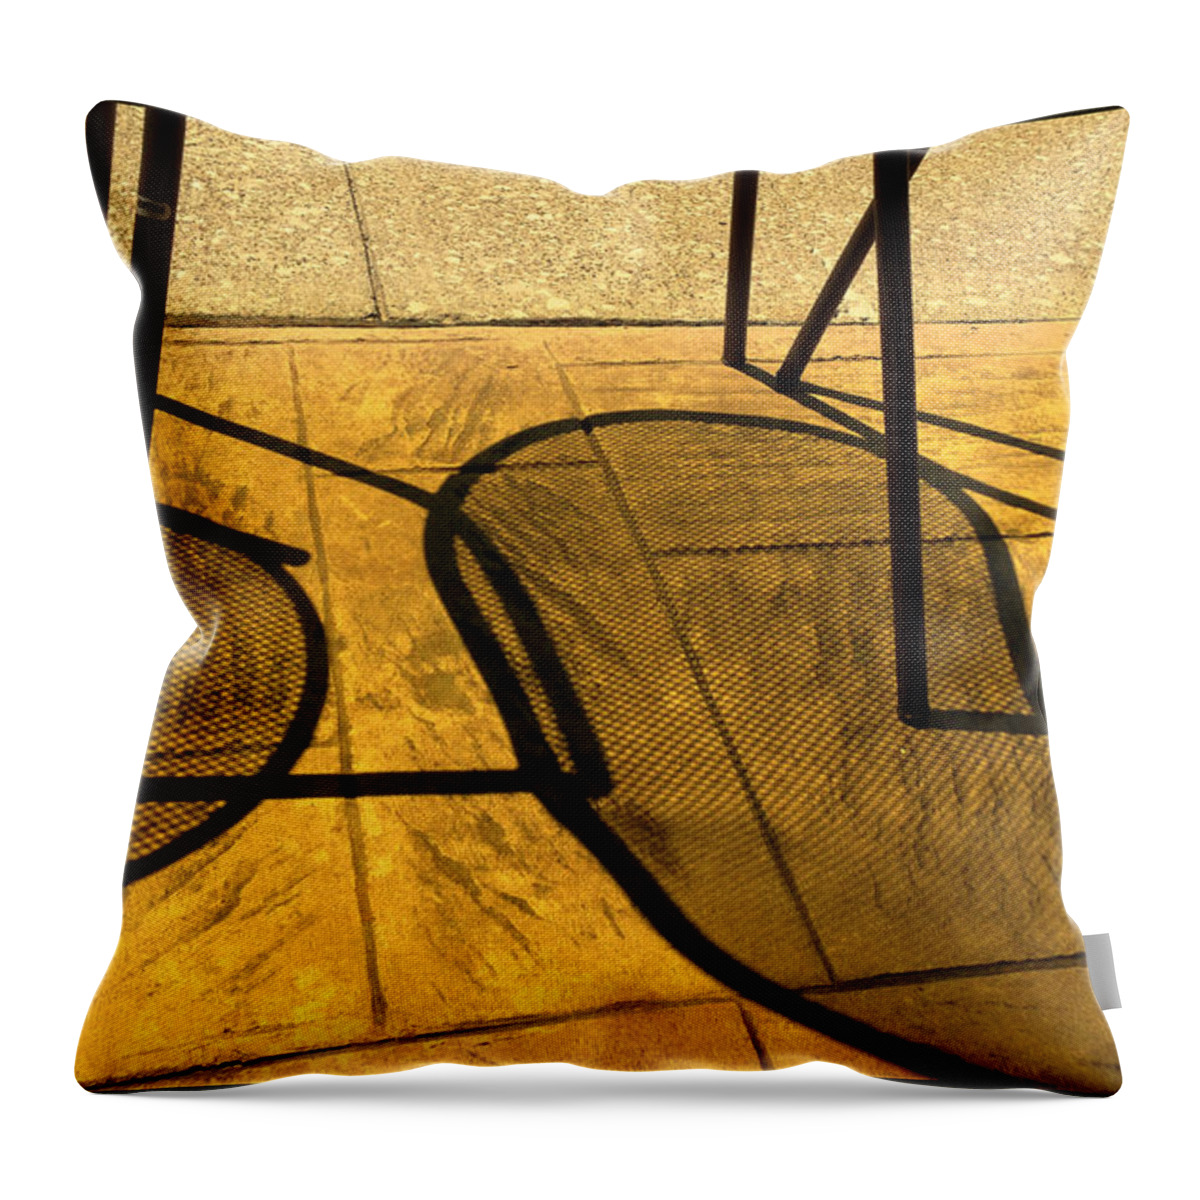 Ohio Throw Pillow featuring the photograph Ohio 14 by Marlene Burns